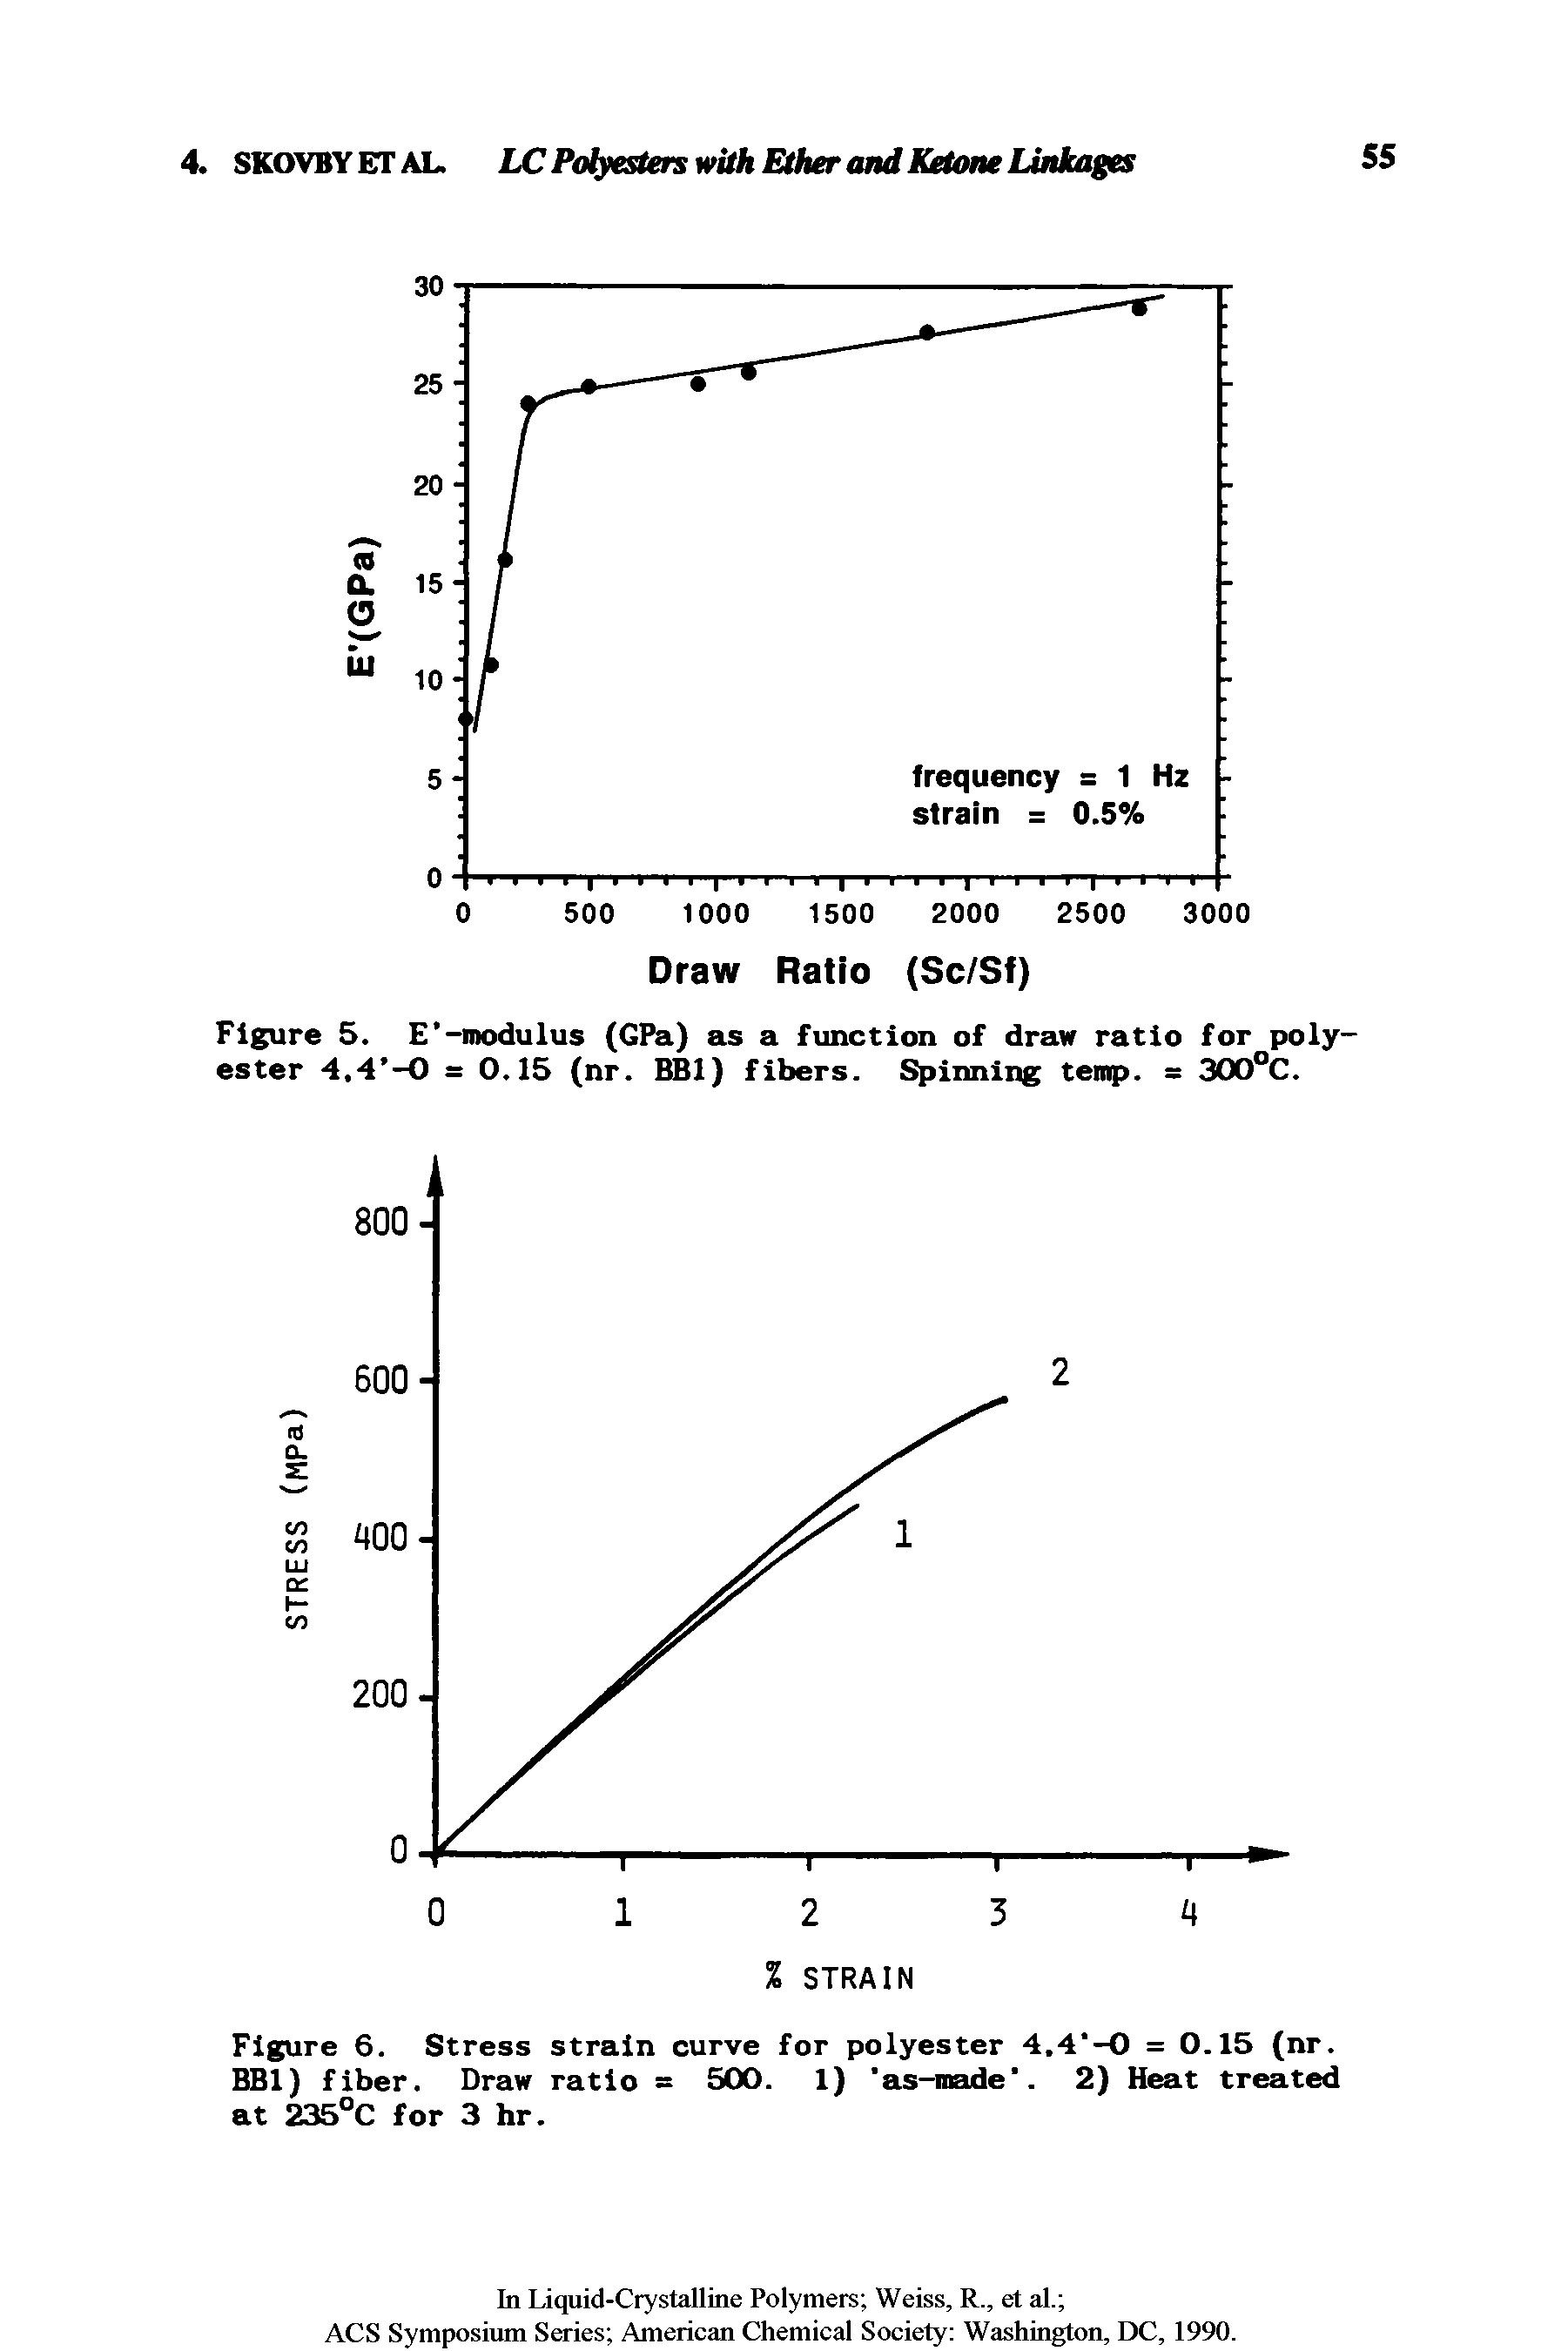 Figure 5. E -modulus (GPa) as a function of draw ratio for polyester 4,4 -0 = 0.15 (nr. BB1) fibers. Spinning temp. = 300°C.